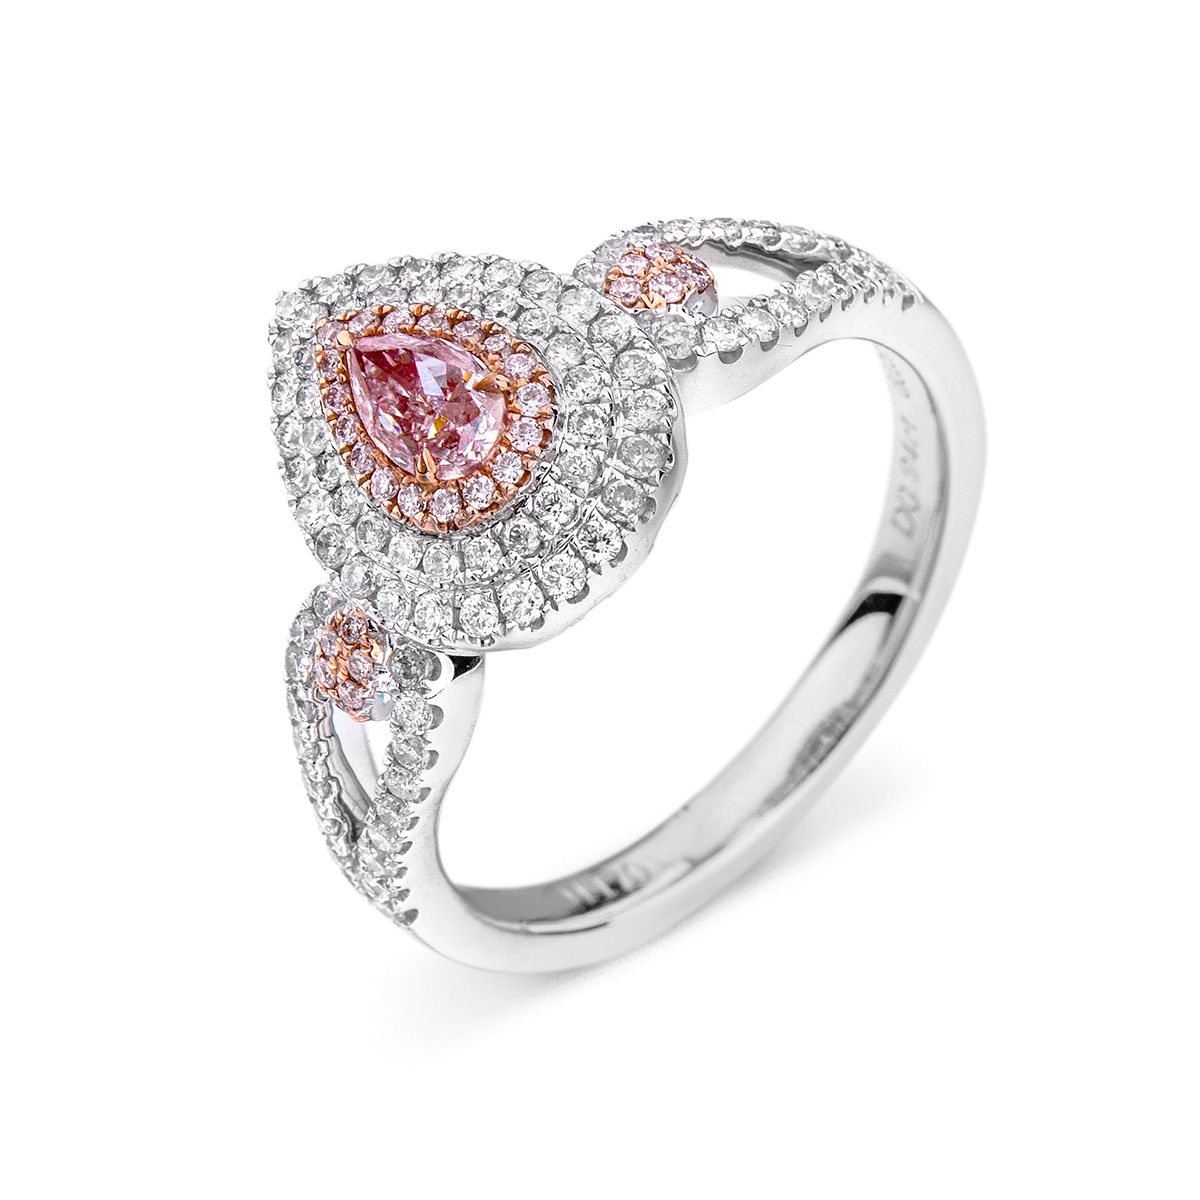 Faint Pink Diamond Ring, 0.24 Ct. (0.75 Ct. TW), Pear shape, GIA Certified, 6183475397